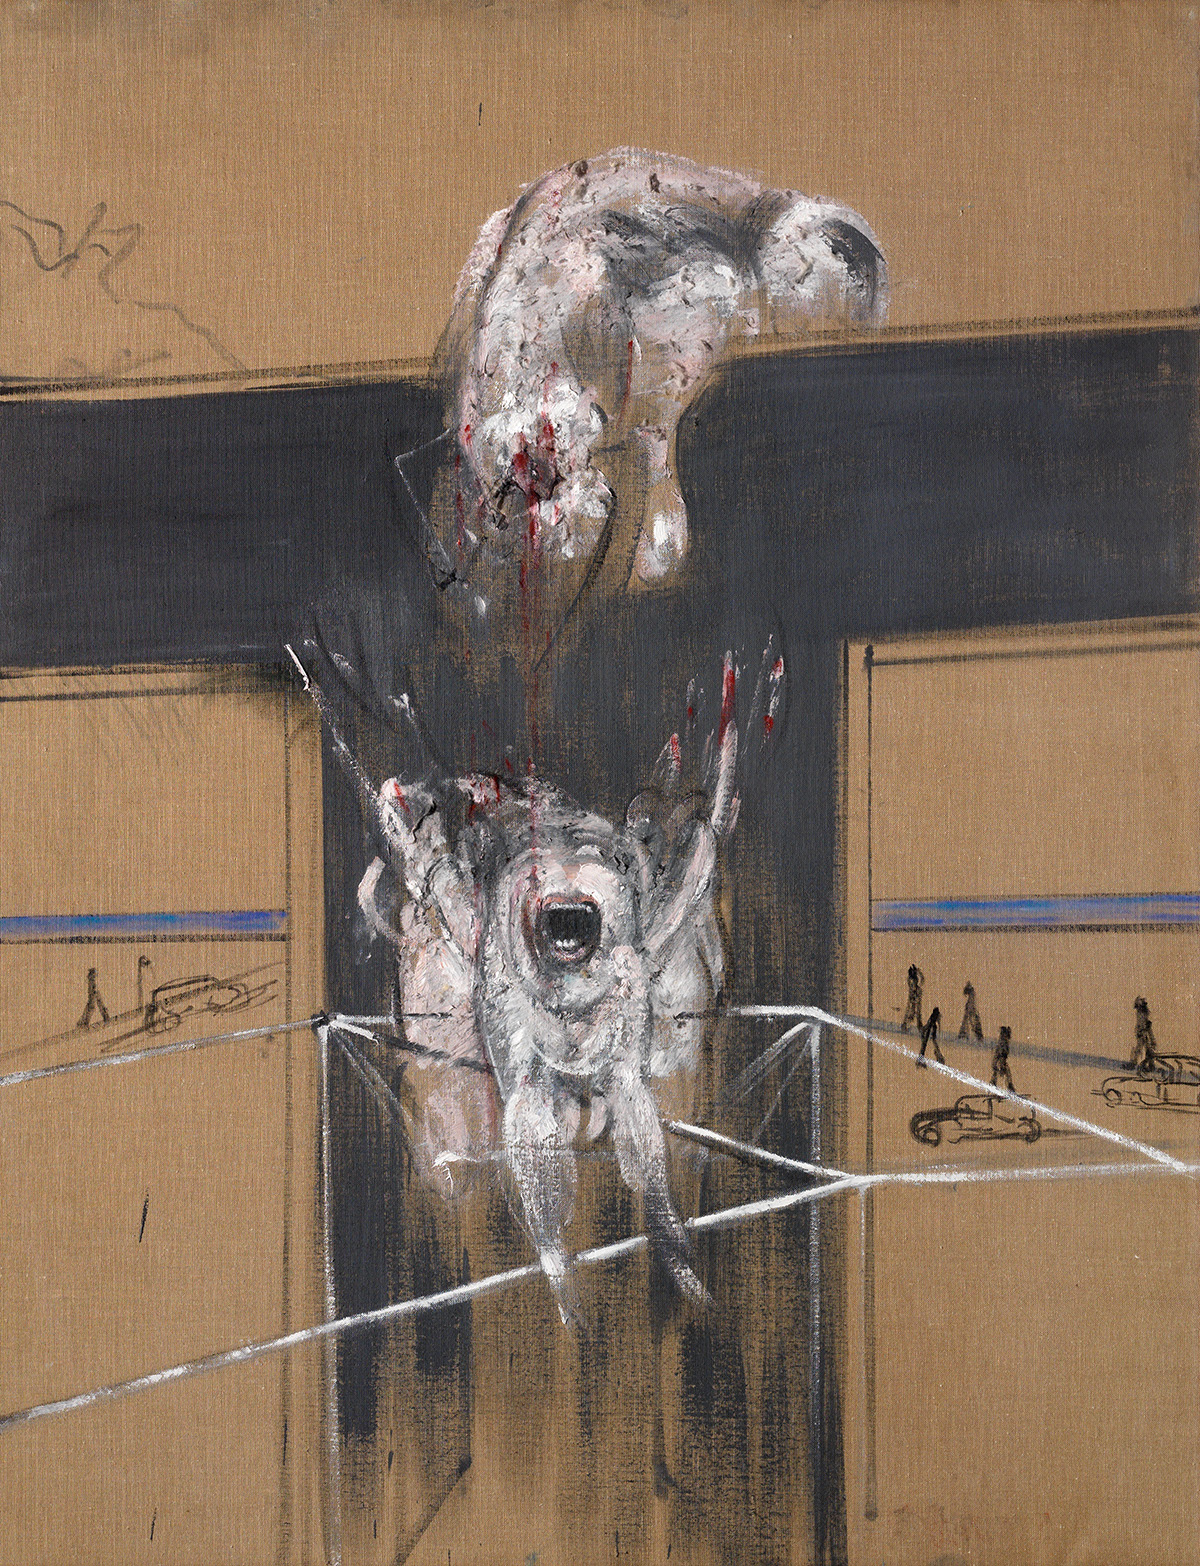  Francis Bacon, Fragment of a Crucifixion, 1950. Oil and cotton wool on canvas. CR number 50- 02. © The Estate of Francis Bacon / DACS London 2020. All rights reserved.